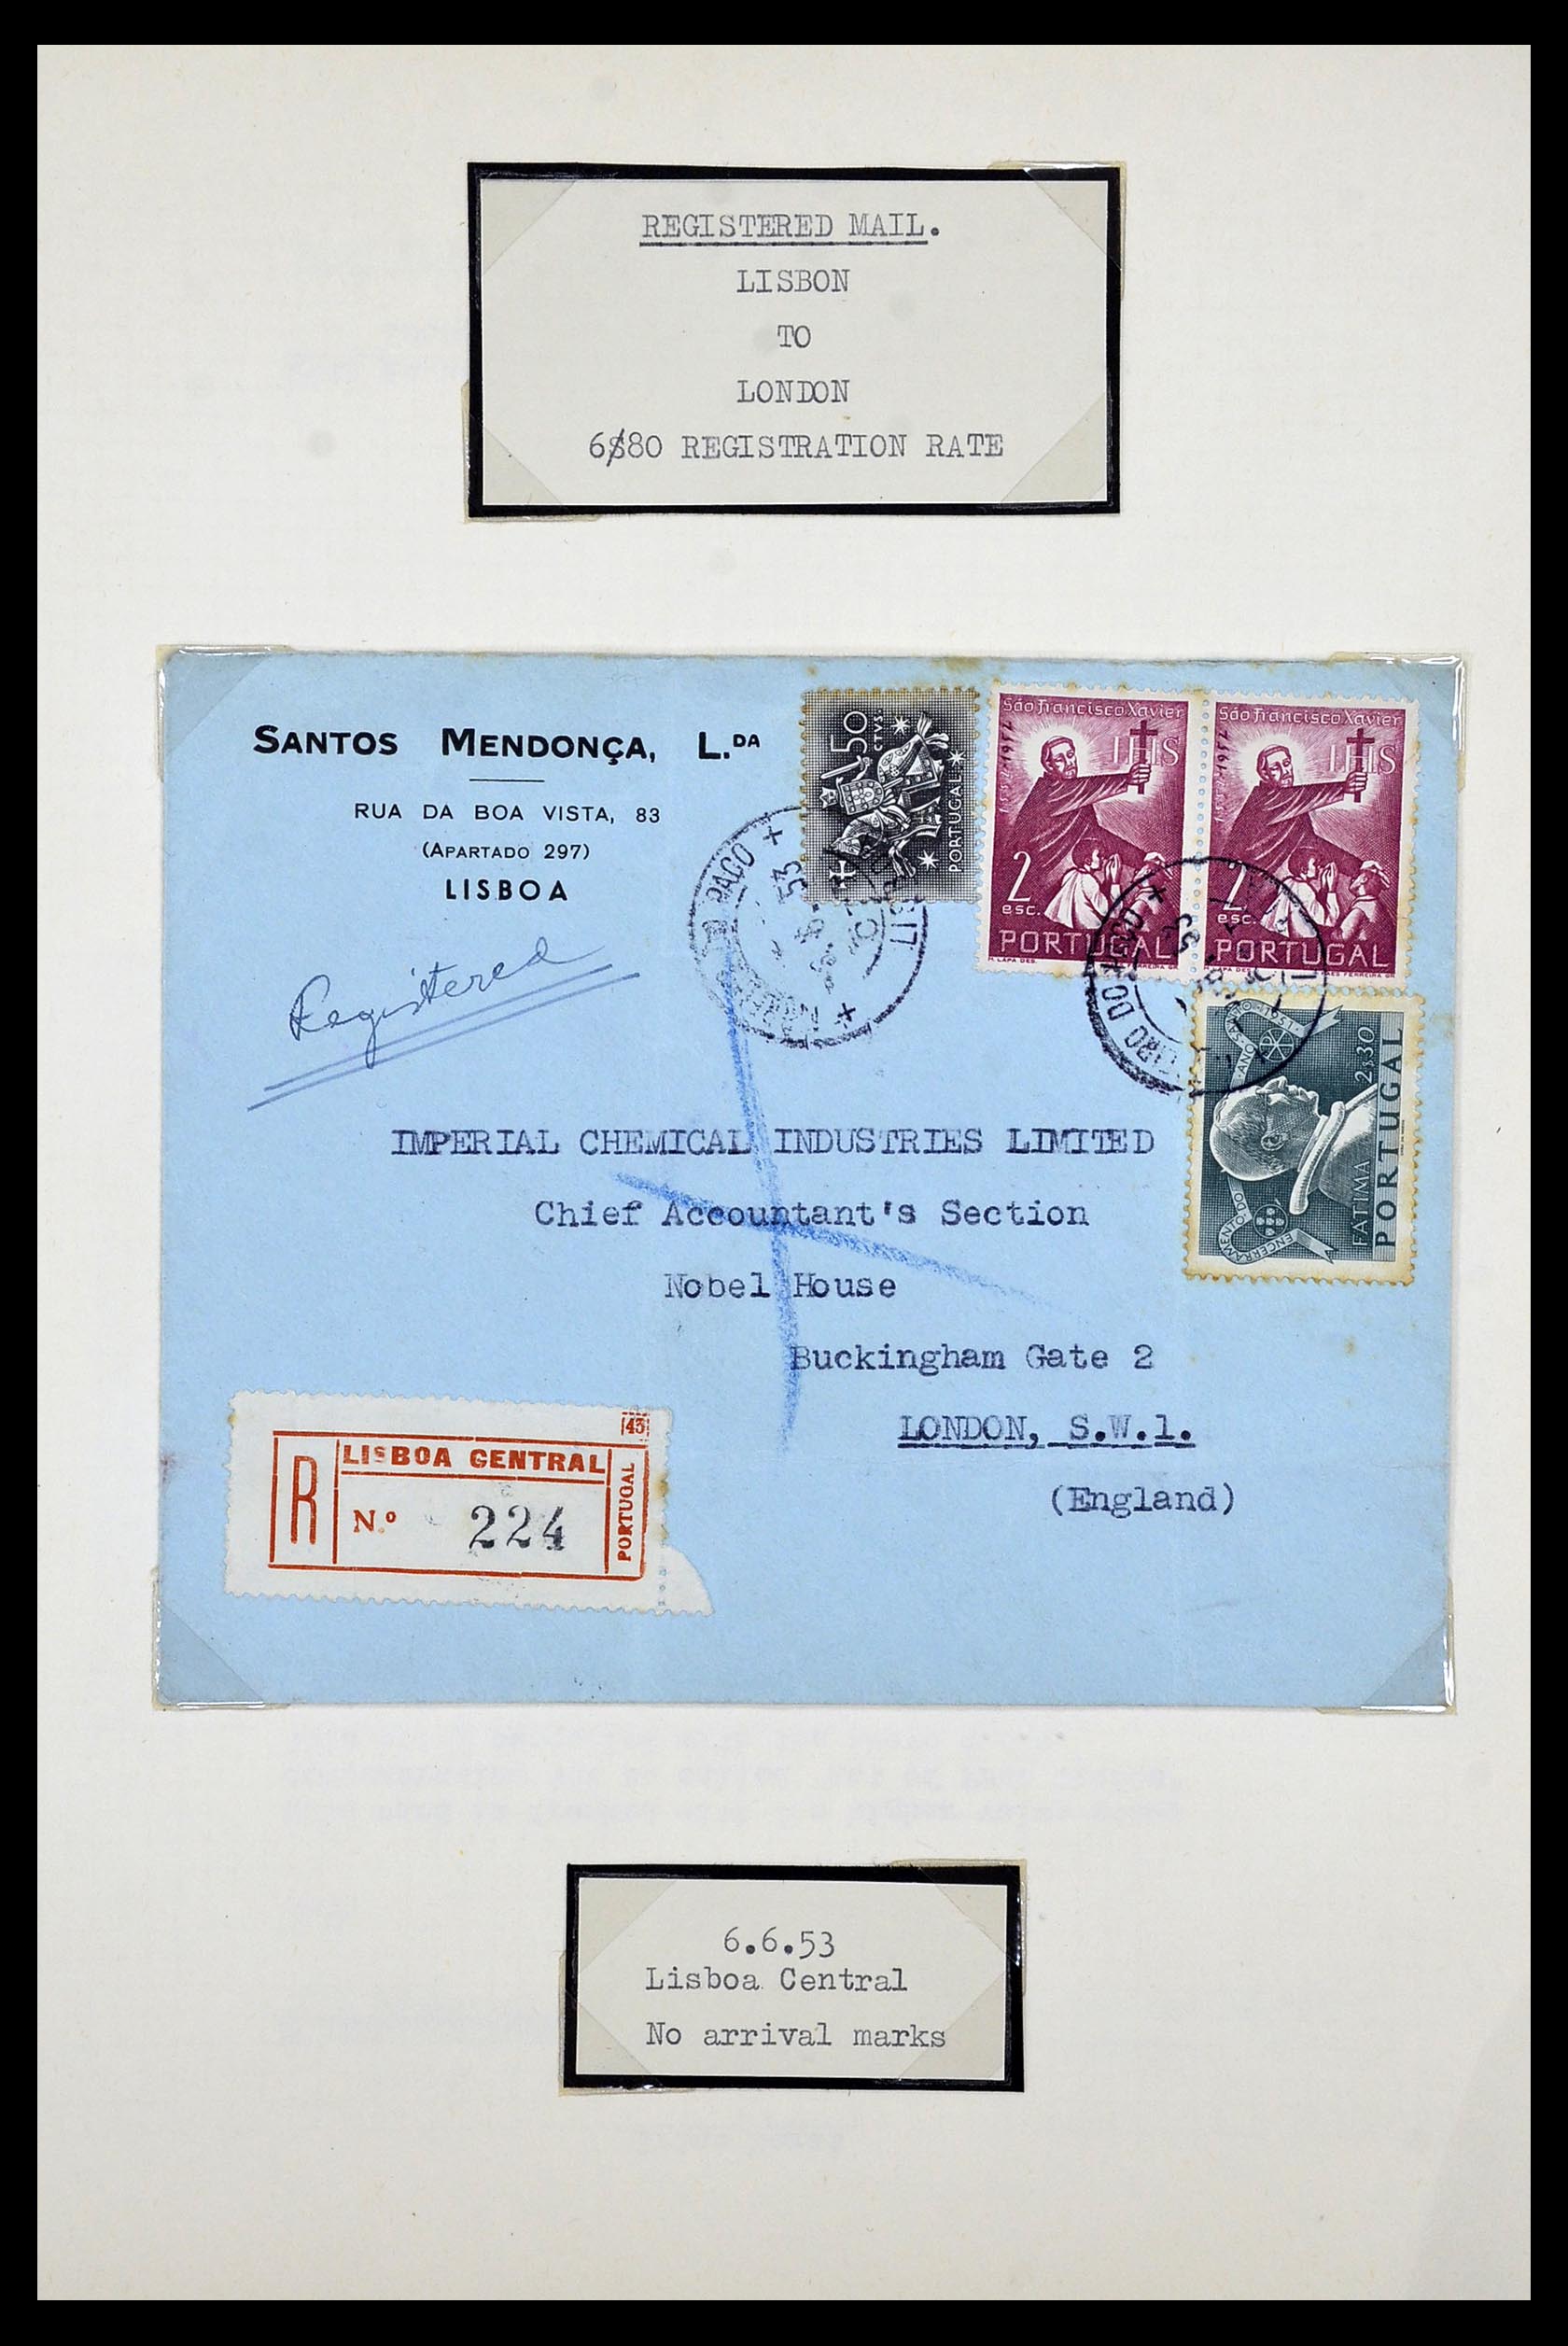 34212 032 - Stamp collection 34212 Portugal covers.